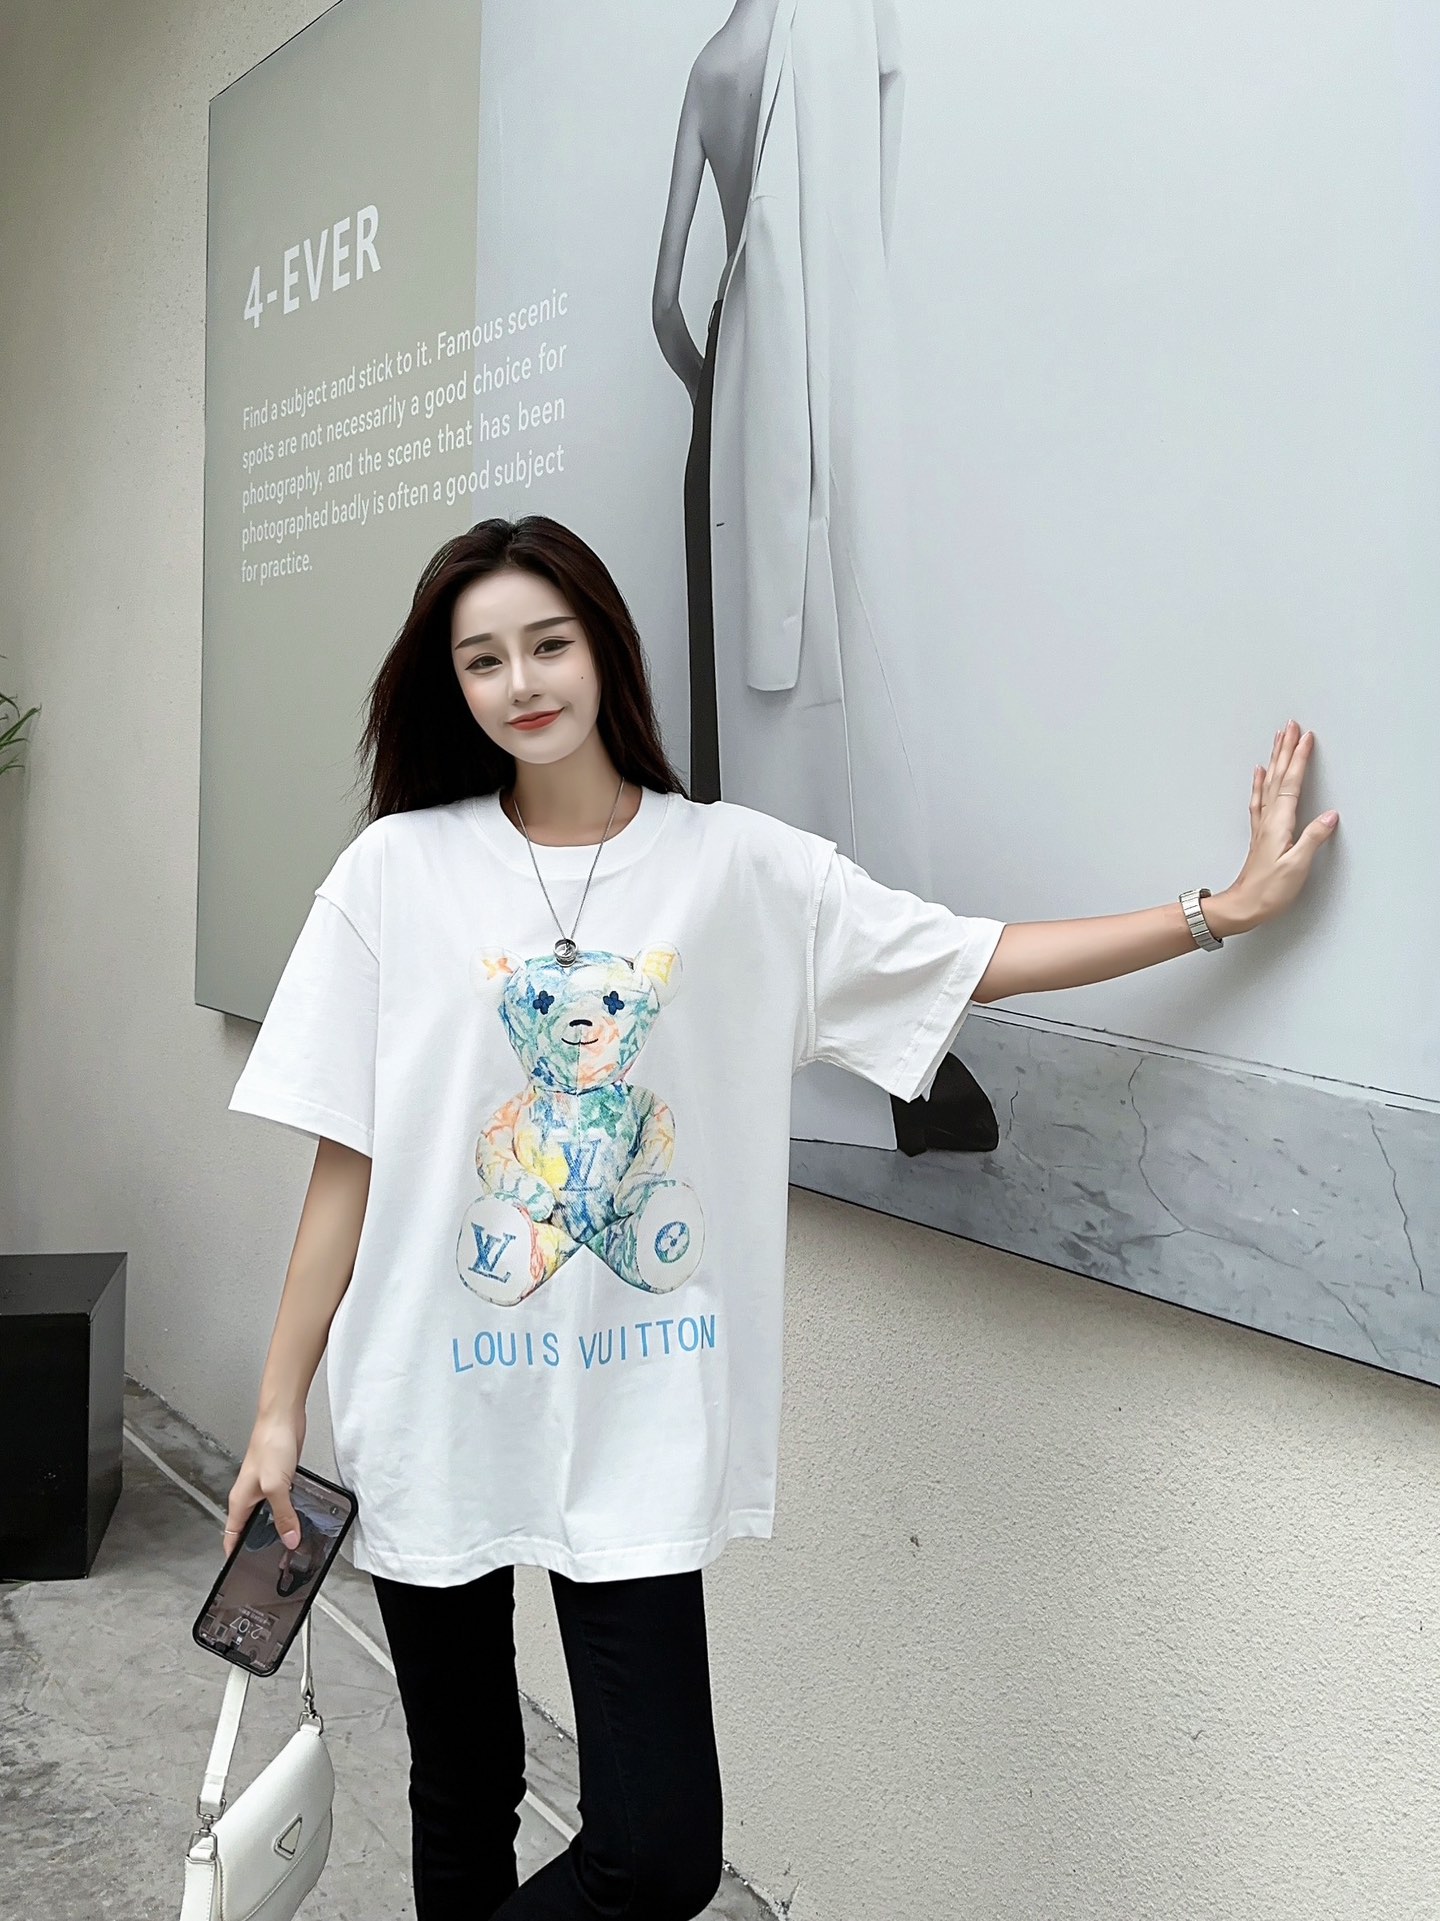 Louis Vuitton Clothing T-Shirt Online From China Unisex Cotton Short Sleeve